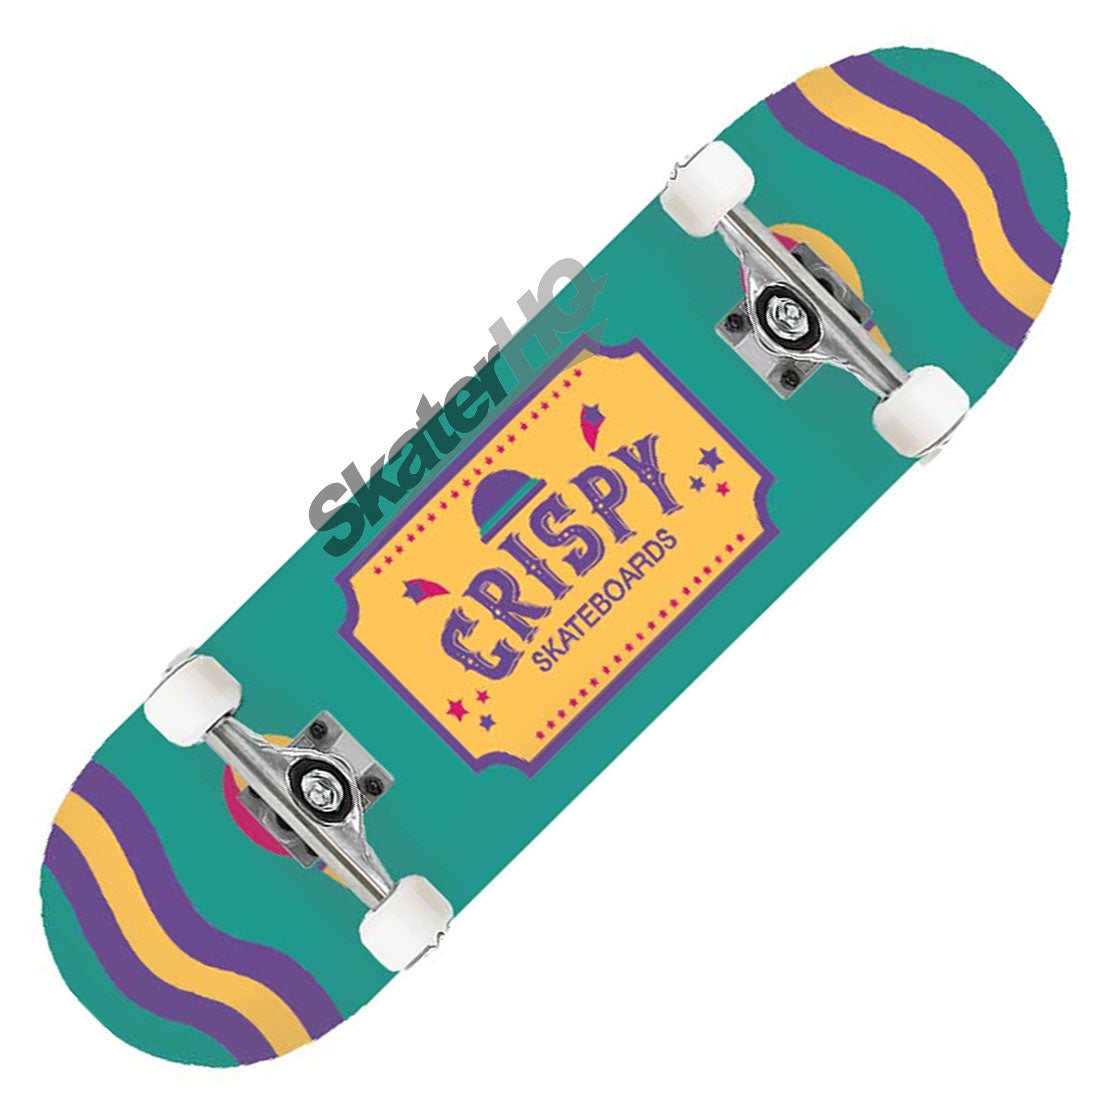 Crispy Rookie Circus 8.0 Complete - Turquoise Skateboard Completes Modern Street